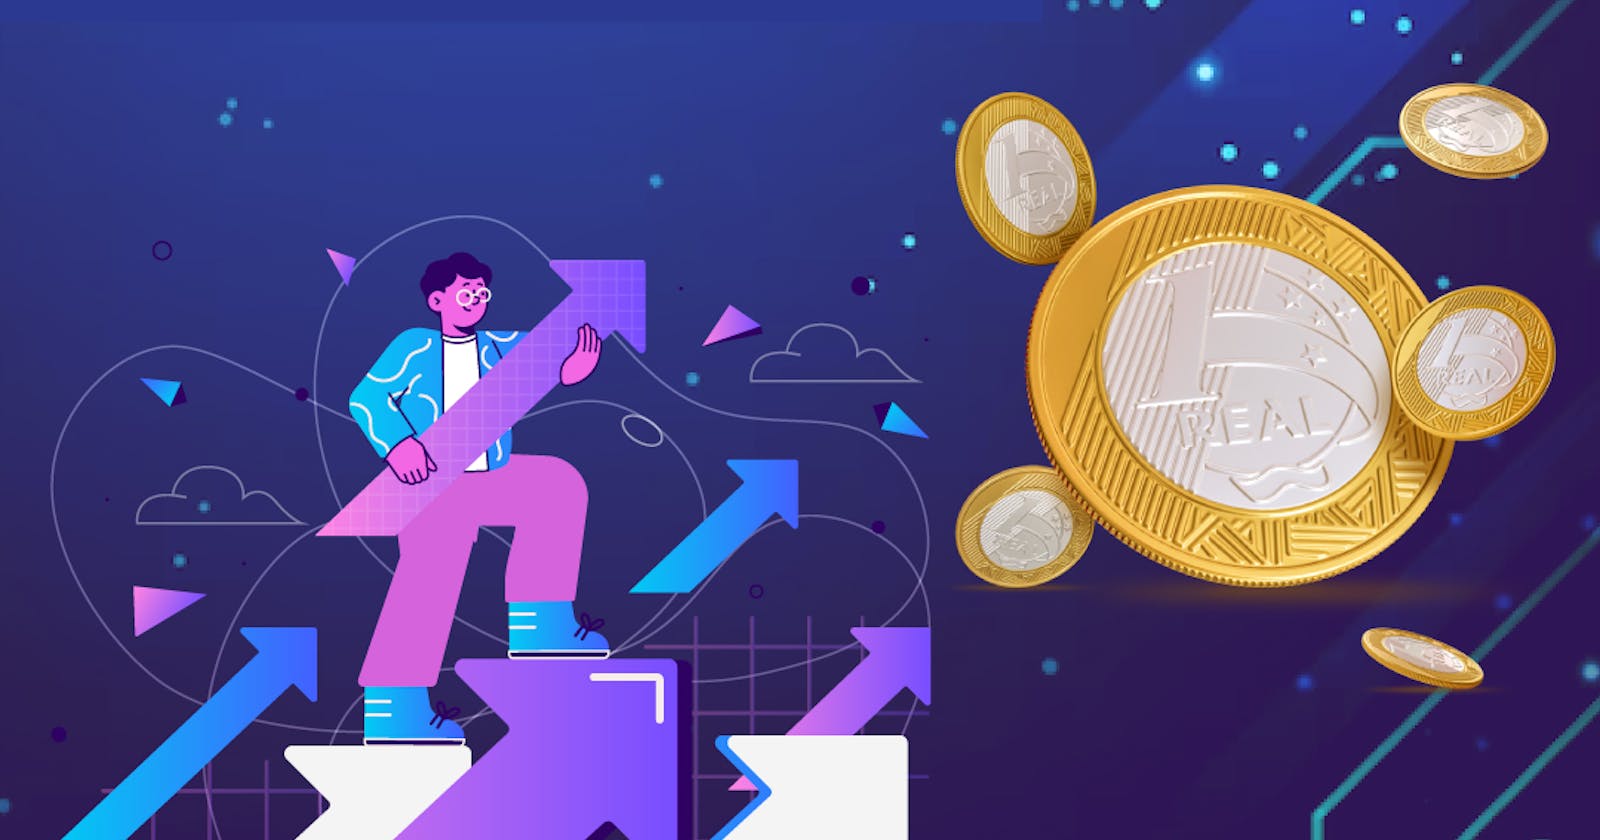 How to Create Cryptocurrency Coin: A Comprehensive Guide